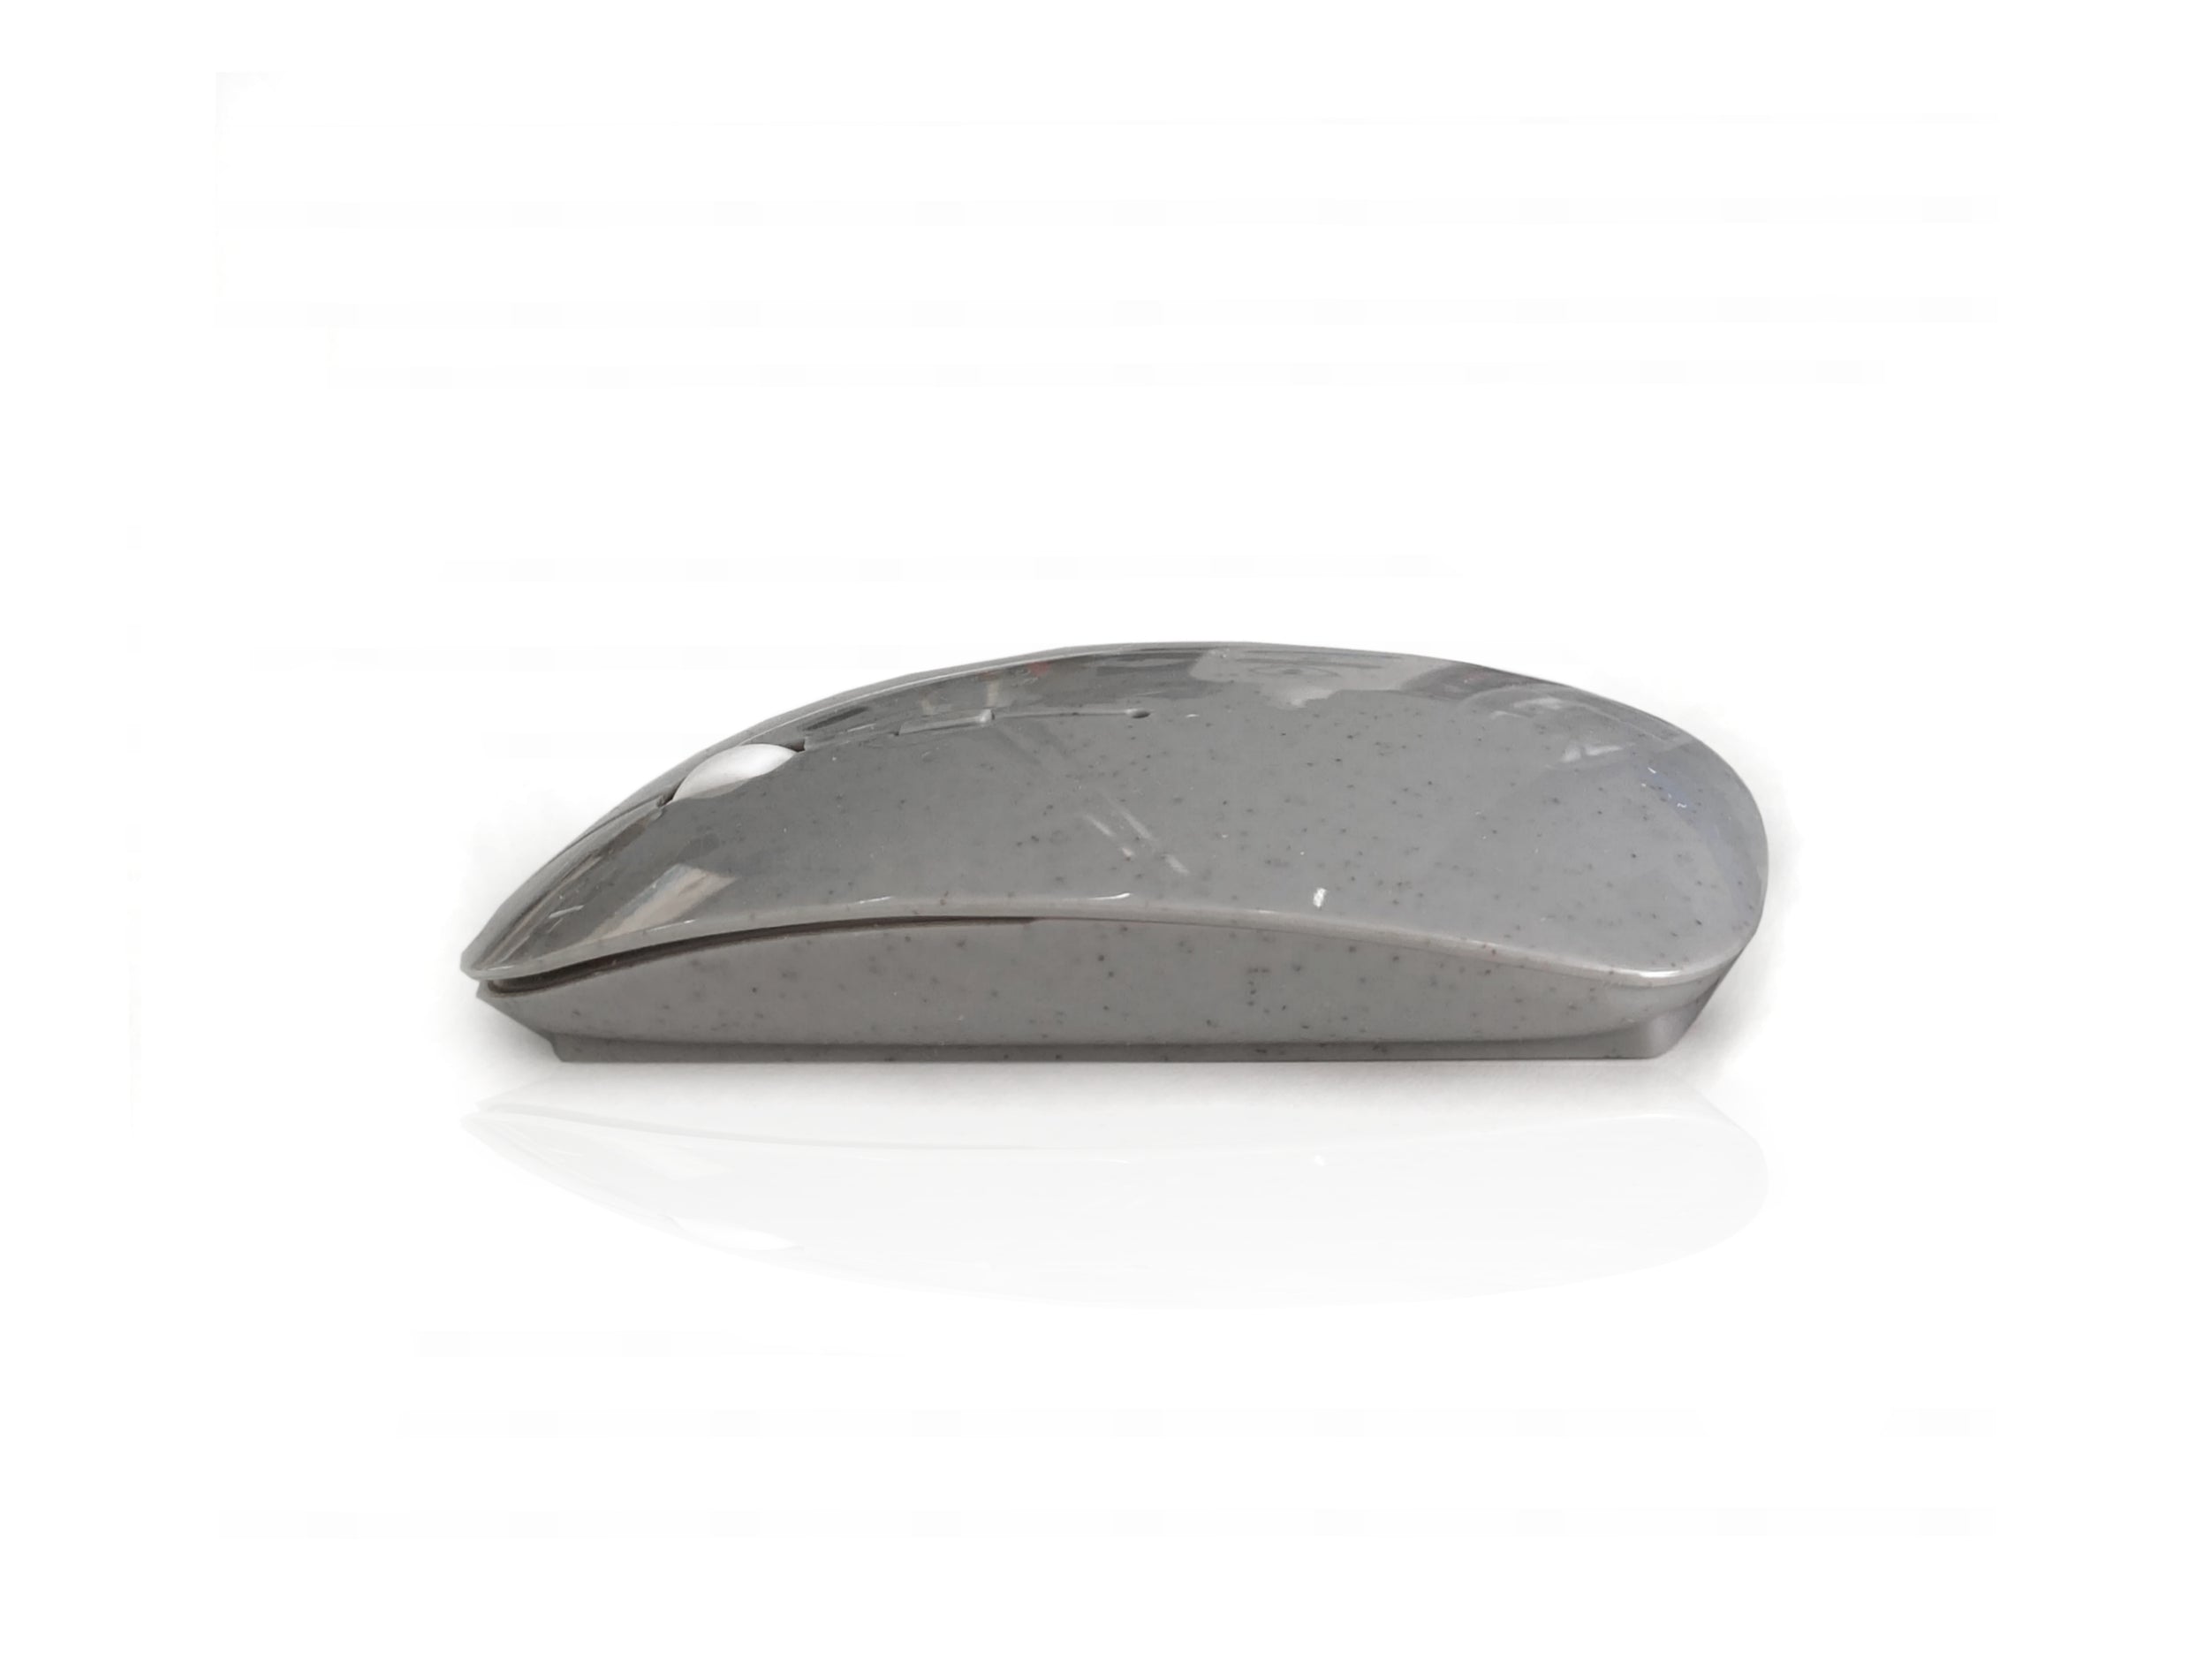 Accuratus Image ECO Step One Wheat Mouse - Wireless Bluetooth 5.1 & RF 2.4Ghz Part Bioplastic Wheat Grass Polymer Mouse - Pewter Grey